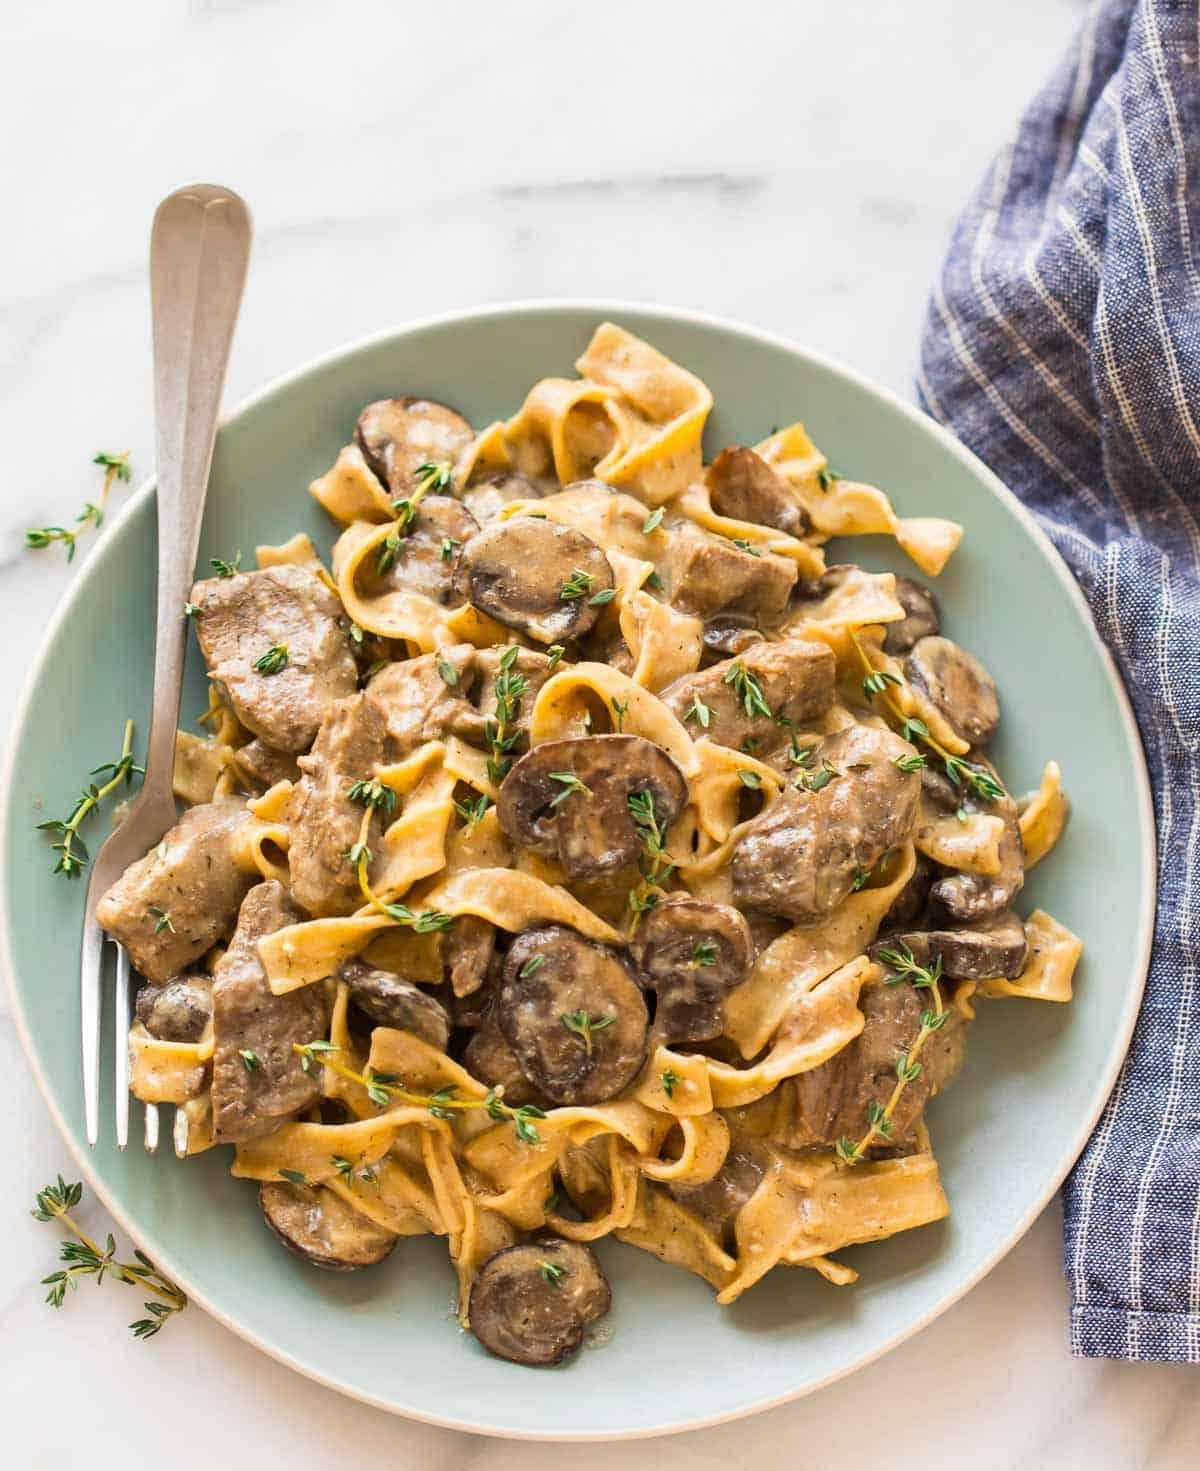 Beef Stroganoff with sliced mushrooms garnished with thyme